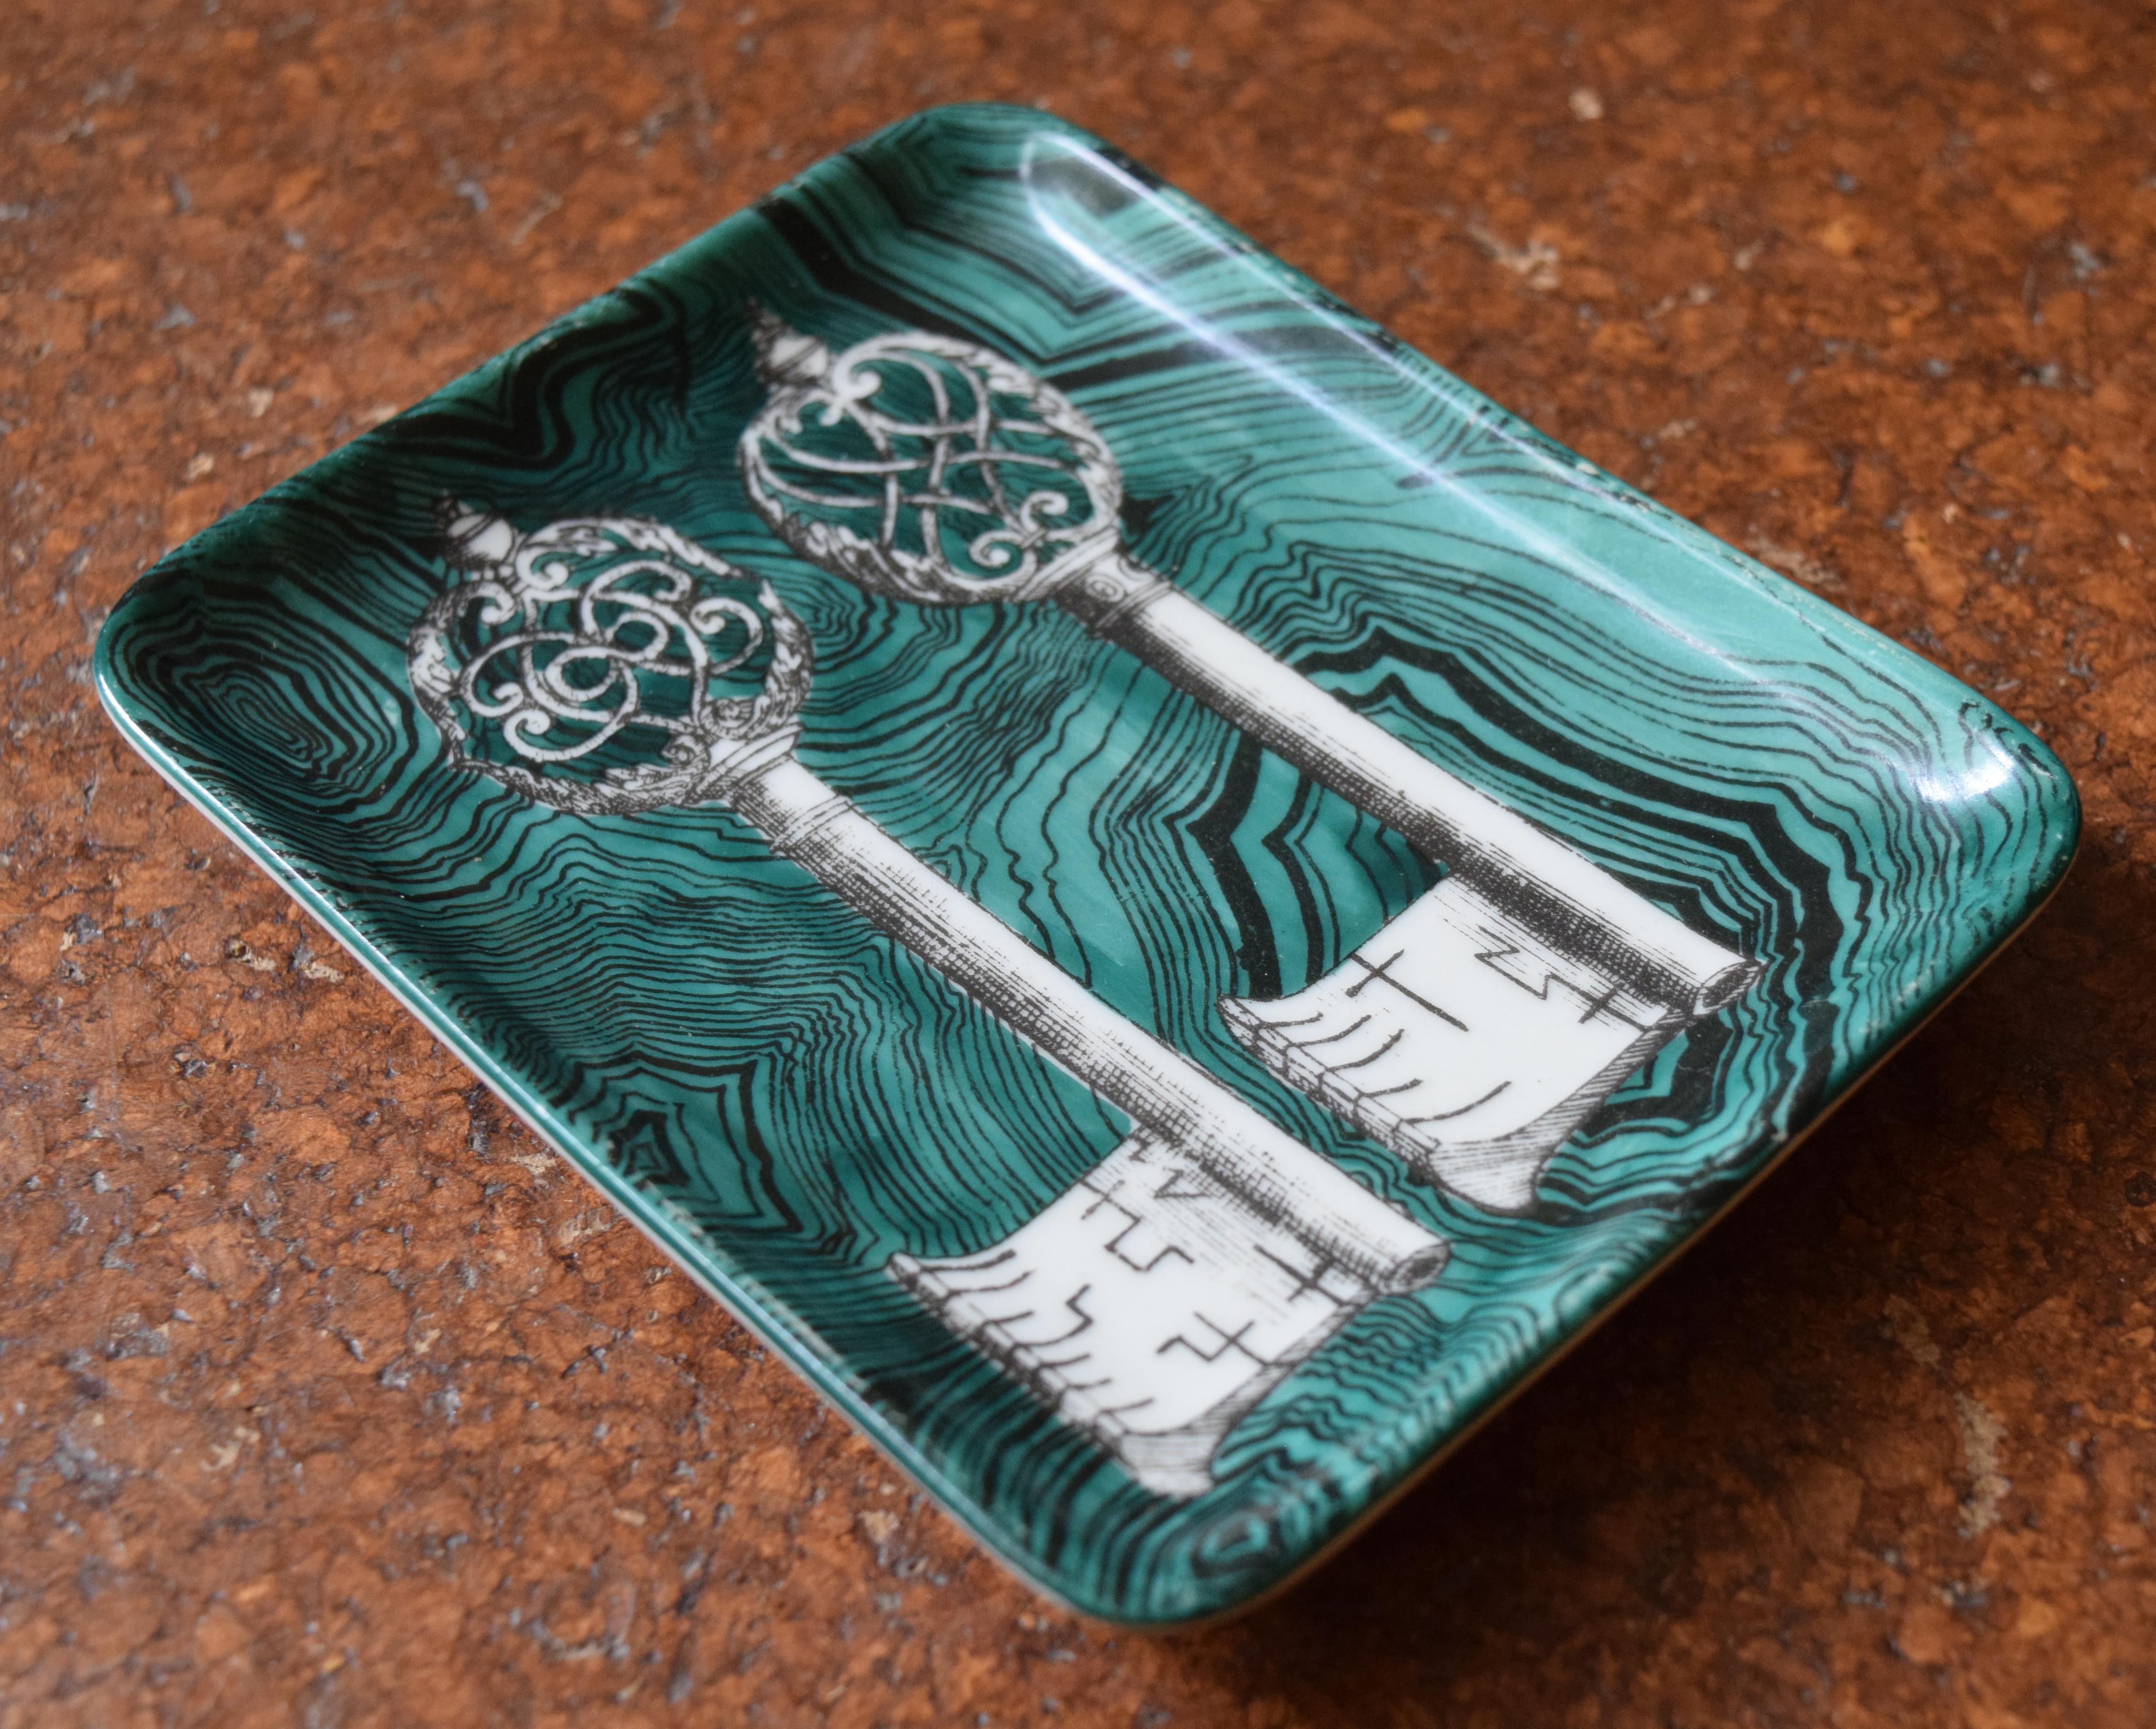 Store closing-- last day is 7/31. Offers welcome! Vintage Fornasetti dish depicting ornate skeleton keys on faux malachite background.